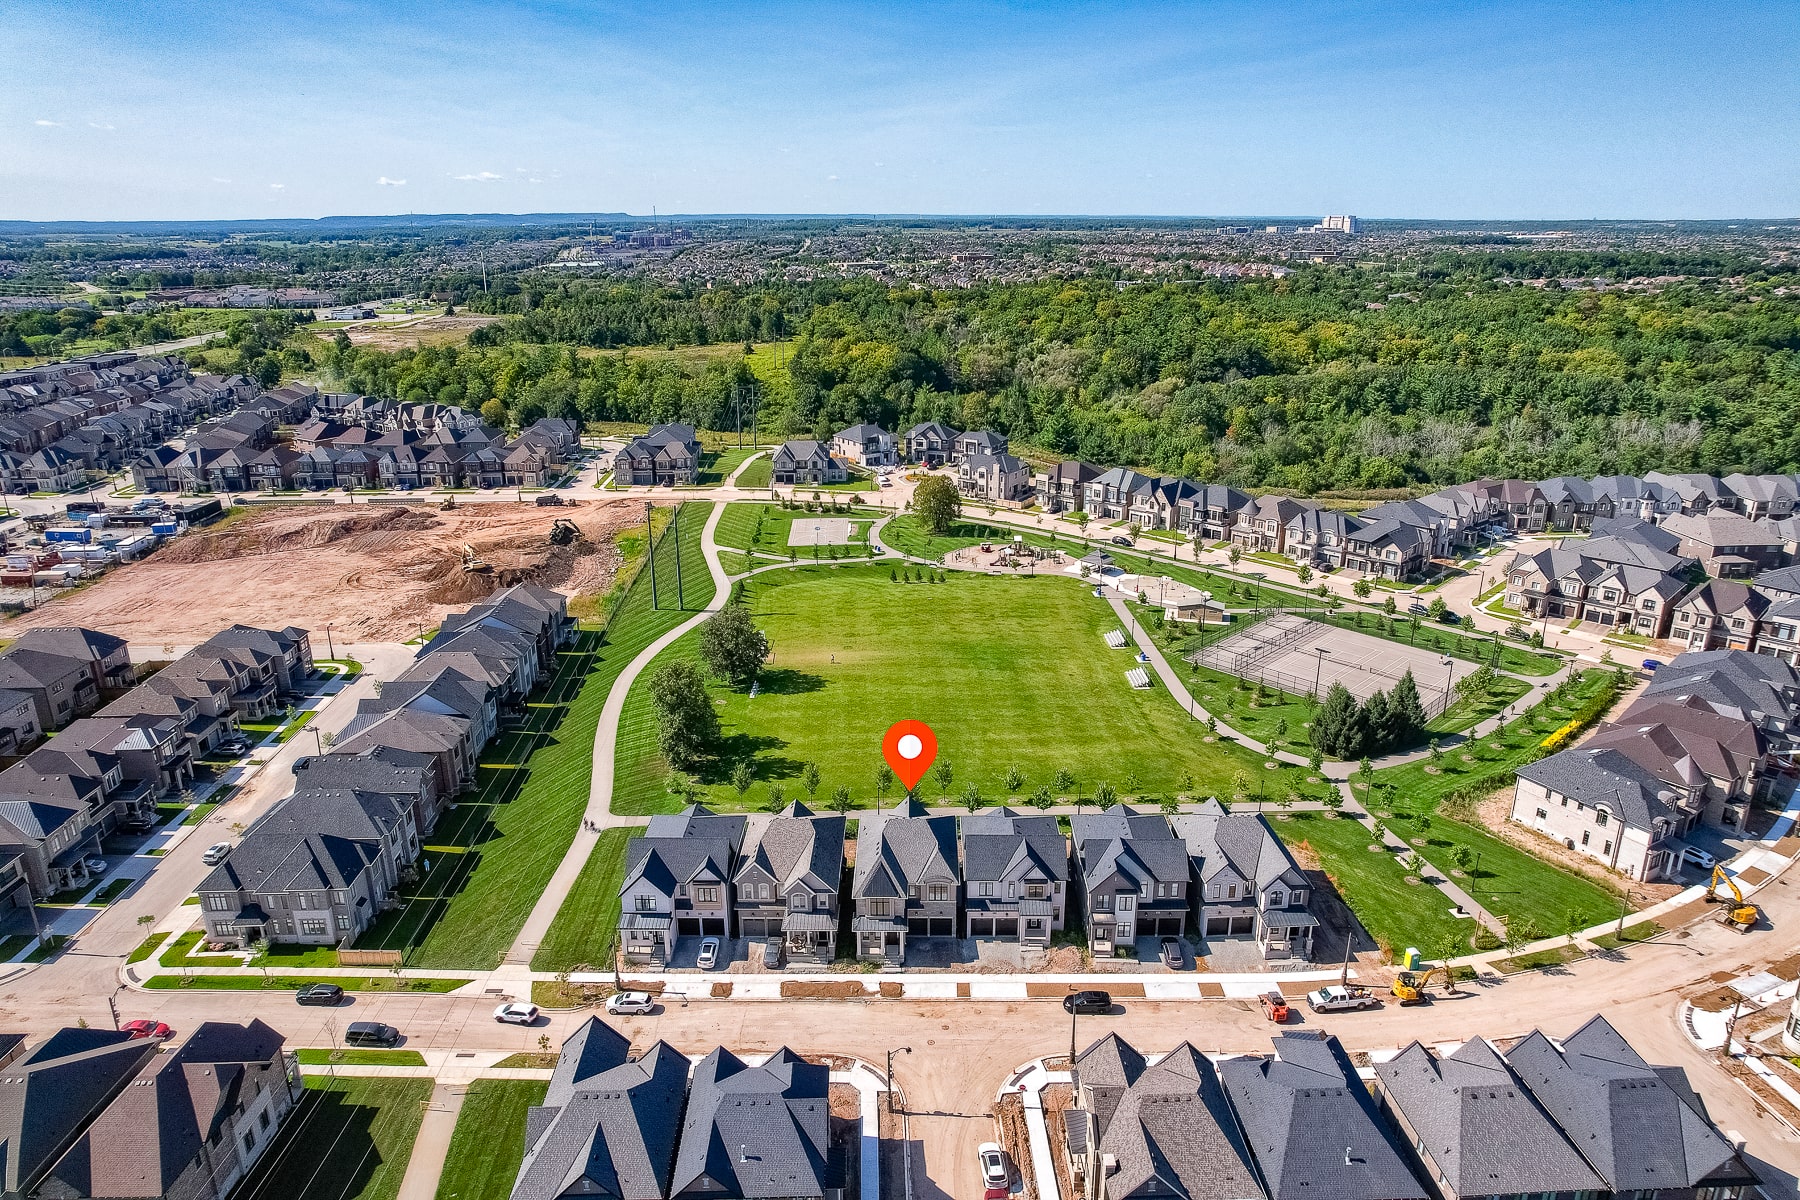 https://www.spectrumrealtyservices.com/images/Bronte-Green-at-Glen-Abbey-unit-2385-1.jpg